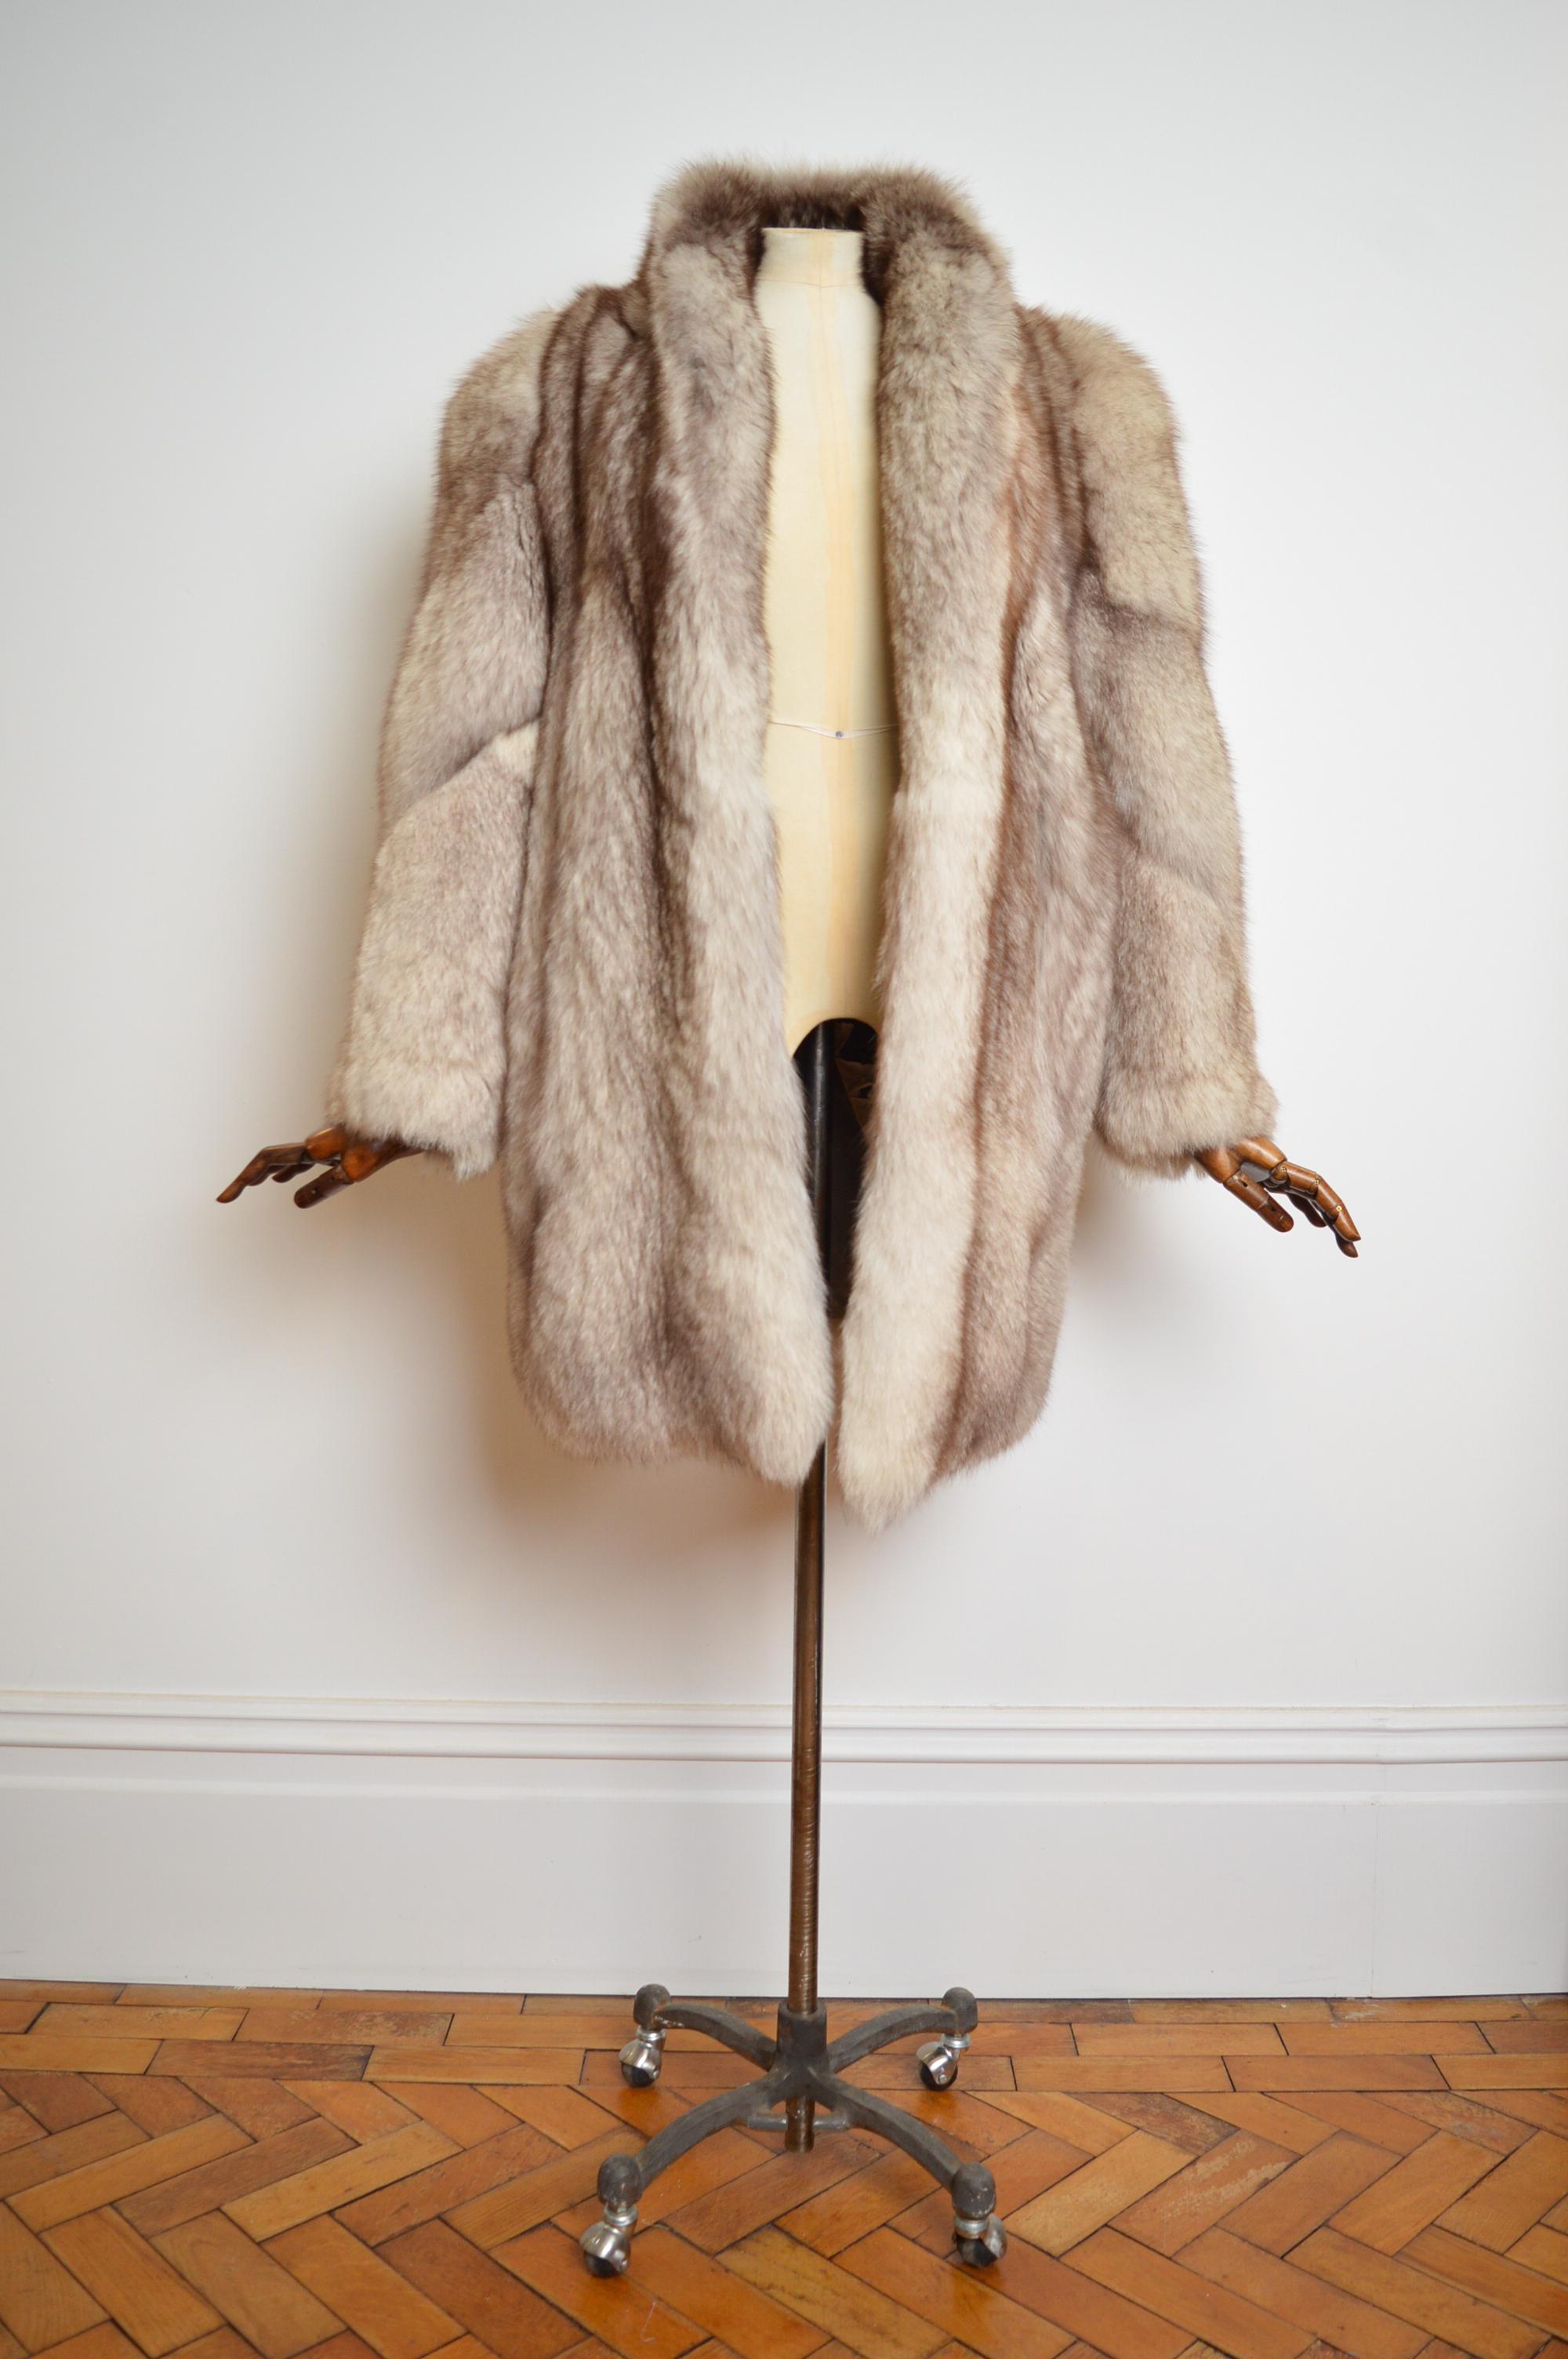 Incredible, Opulent Vintage 1970's Thick Arctic Fox fur Coat in Silver and White Tones.  

This exceptional Vintage Fur Jacket features extremely Plush, thick Pelts of soft Natural Arctic Fox (Vulpes Lagopus), Hip Pockets pockets, Interior Pocket,